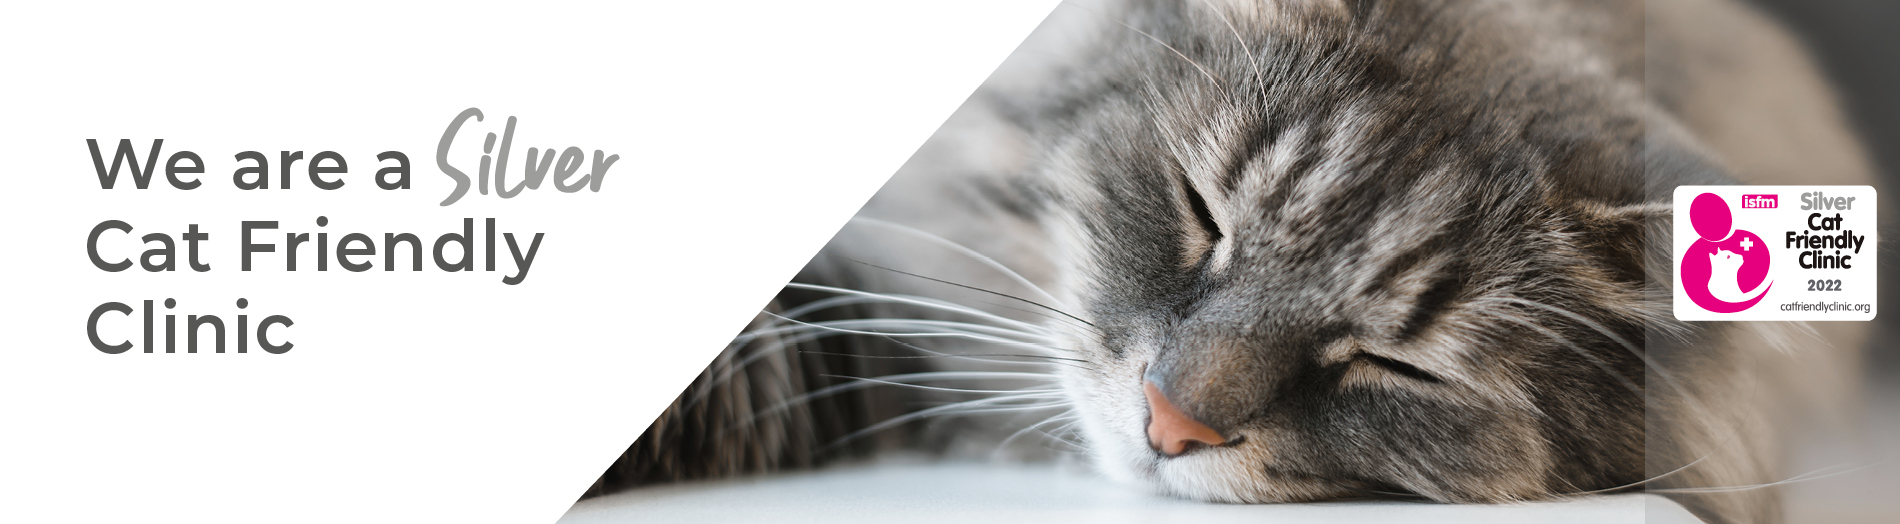 Cat Friendly Clinic | Silver Level Accredited | Blythwood Vets